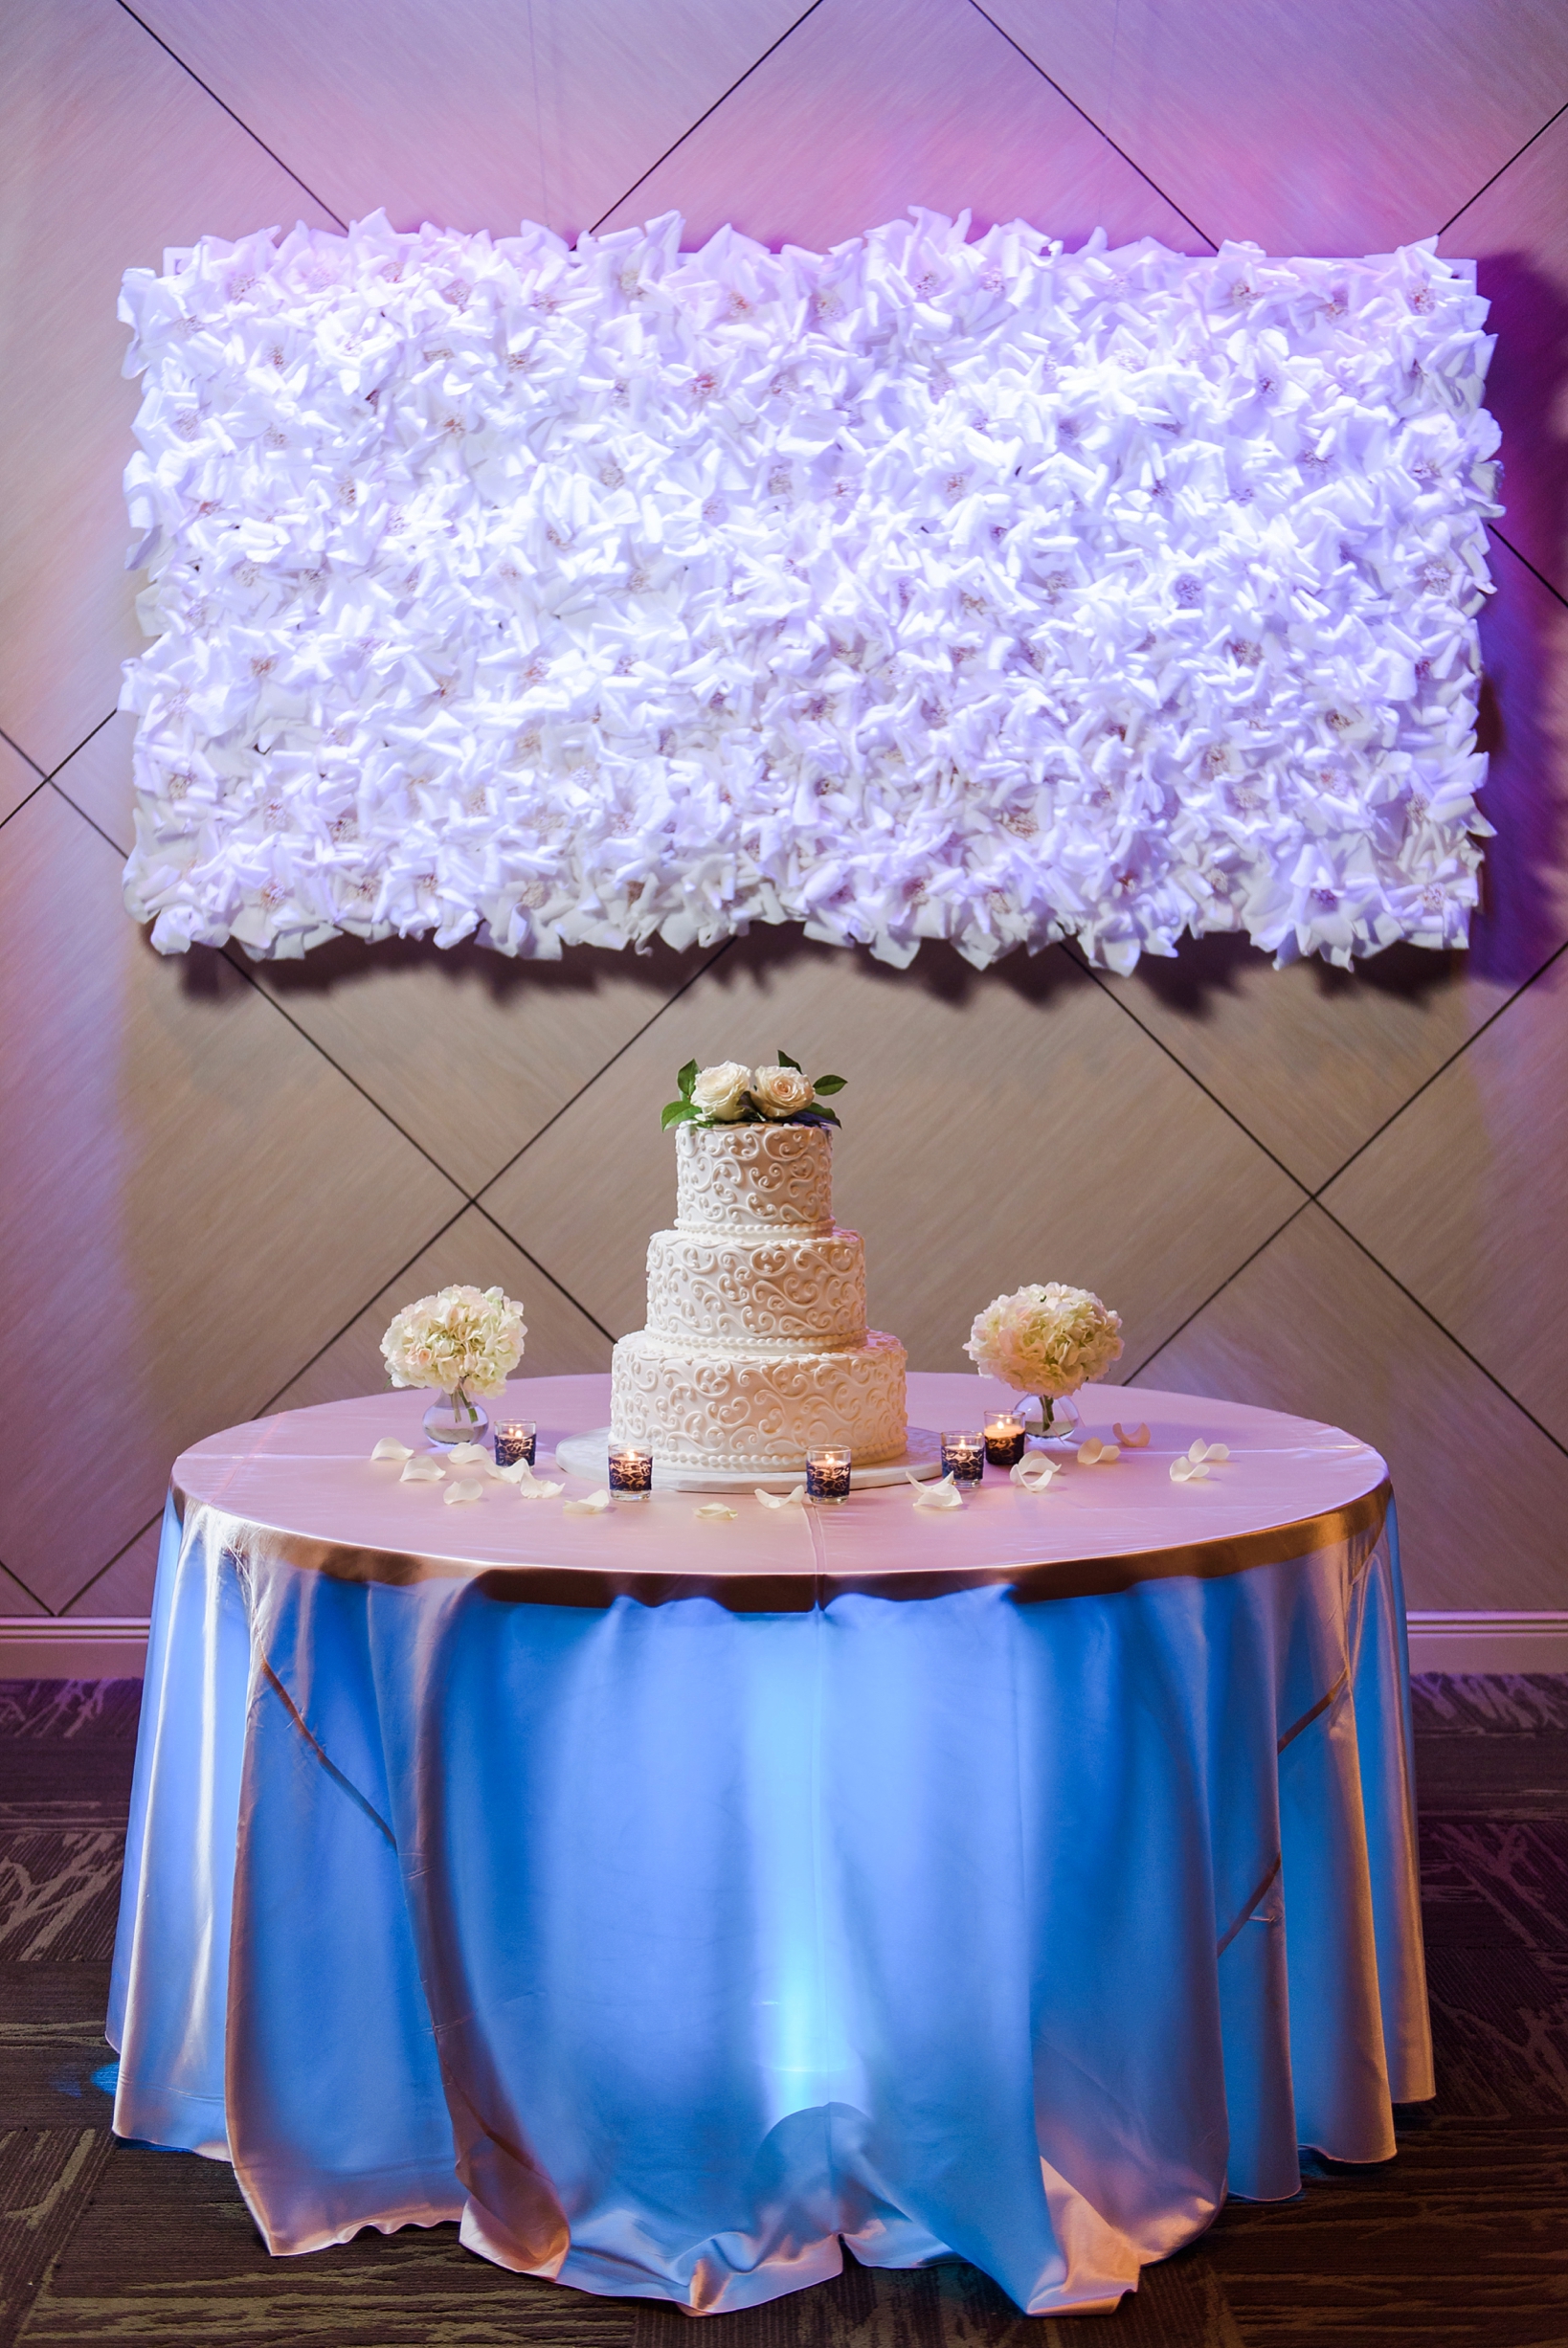 The cake table being uplight by purple and blue lights